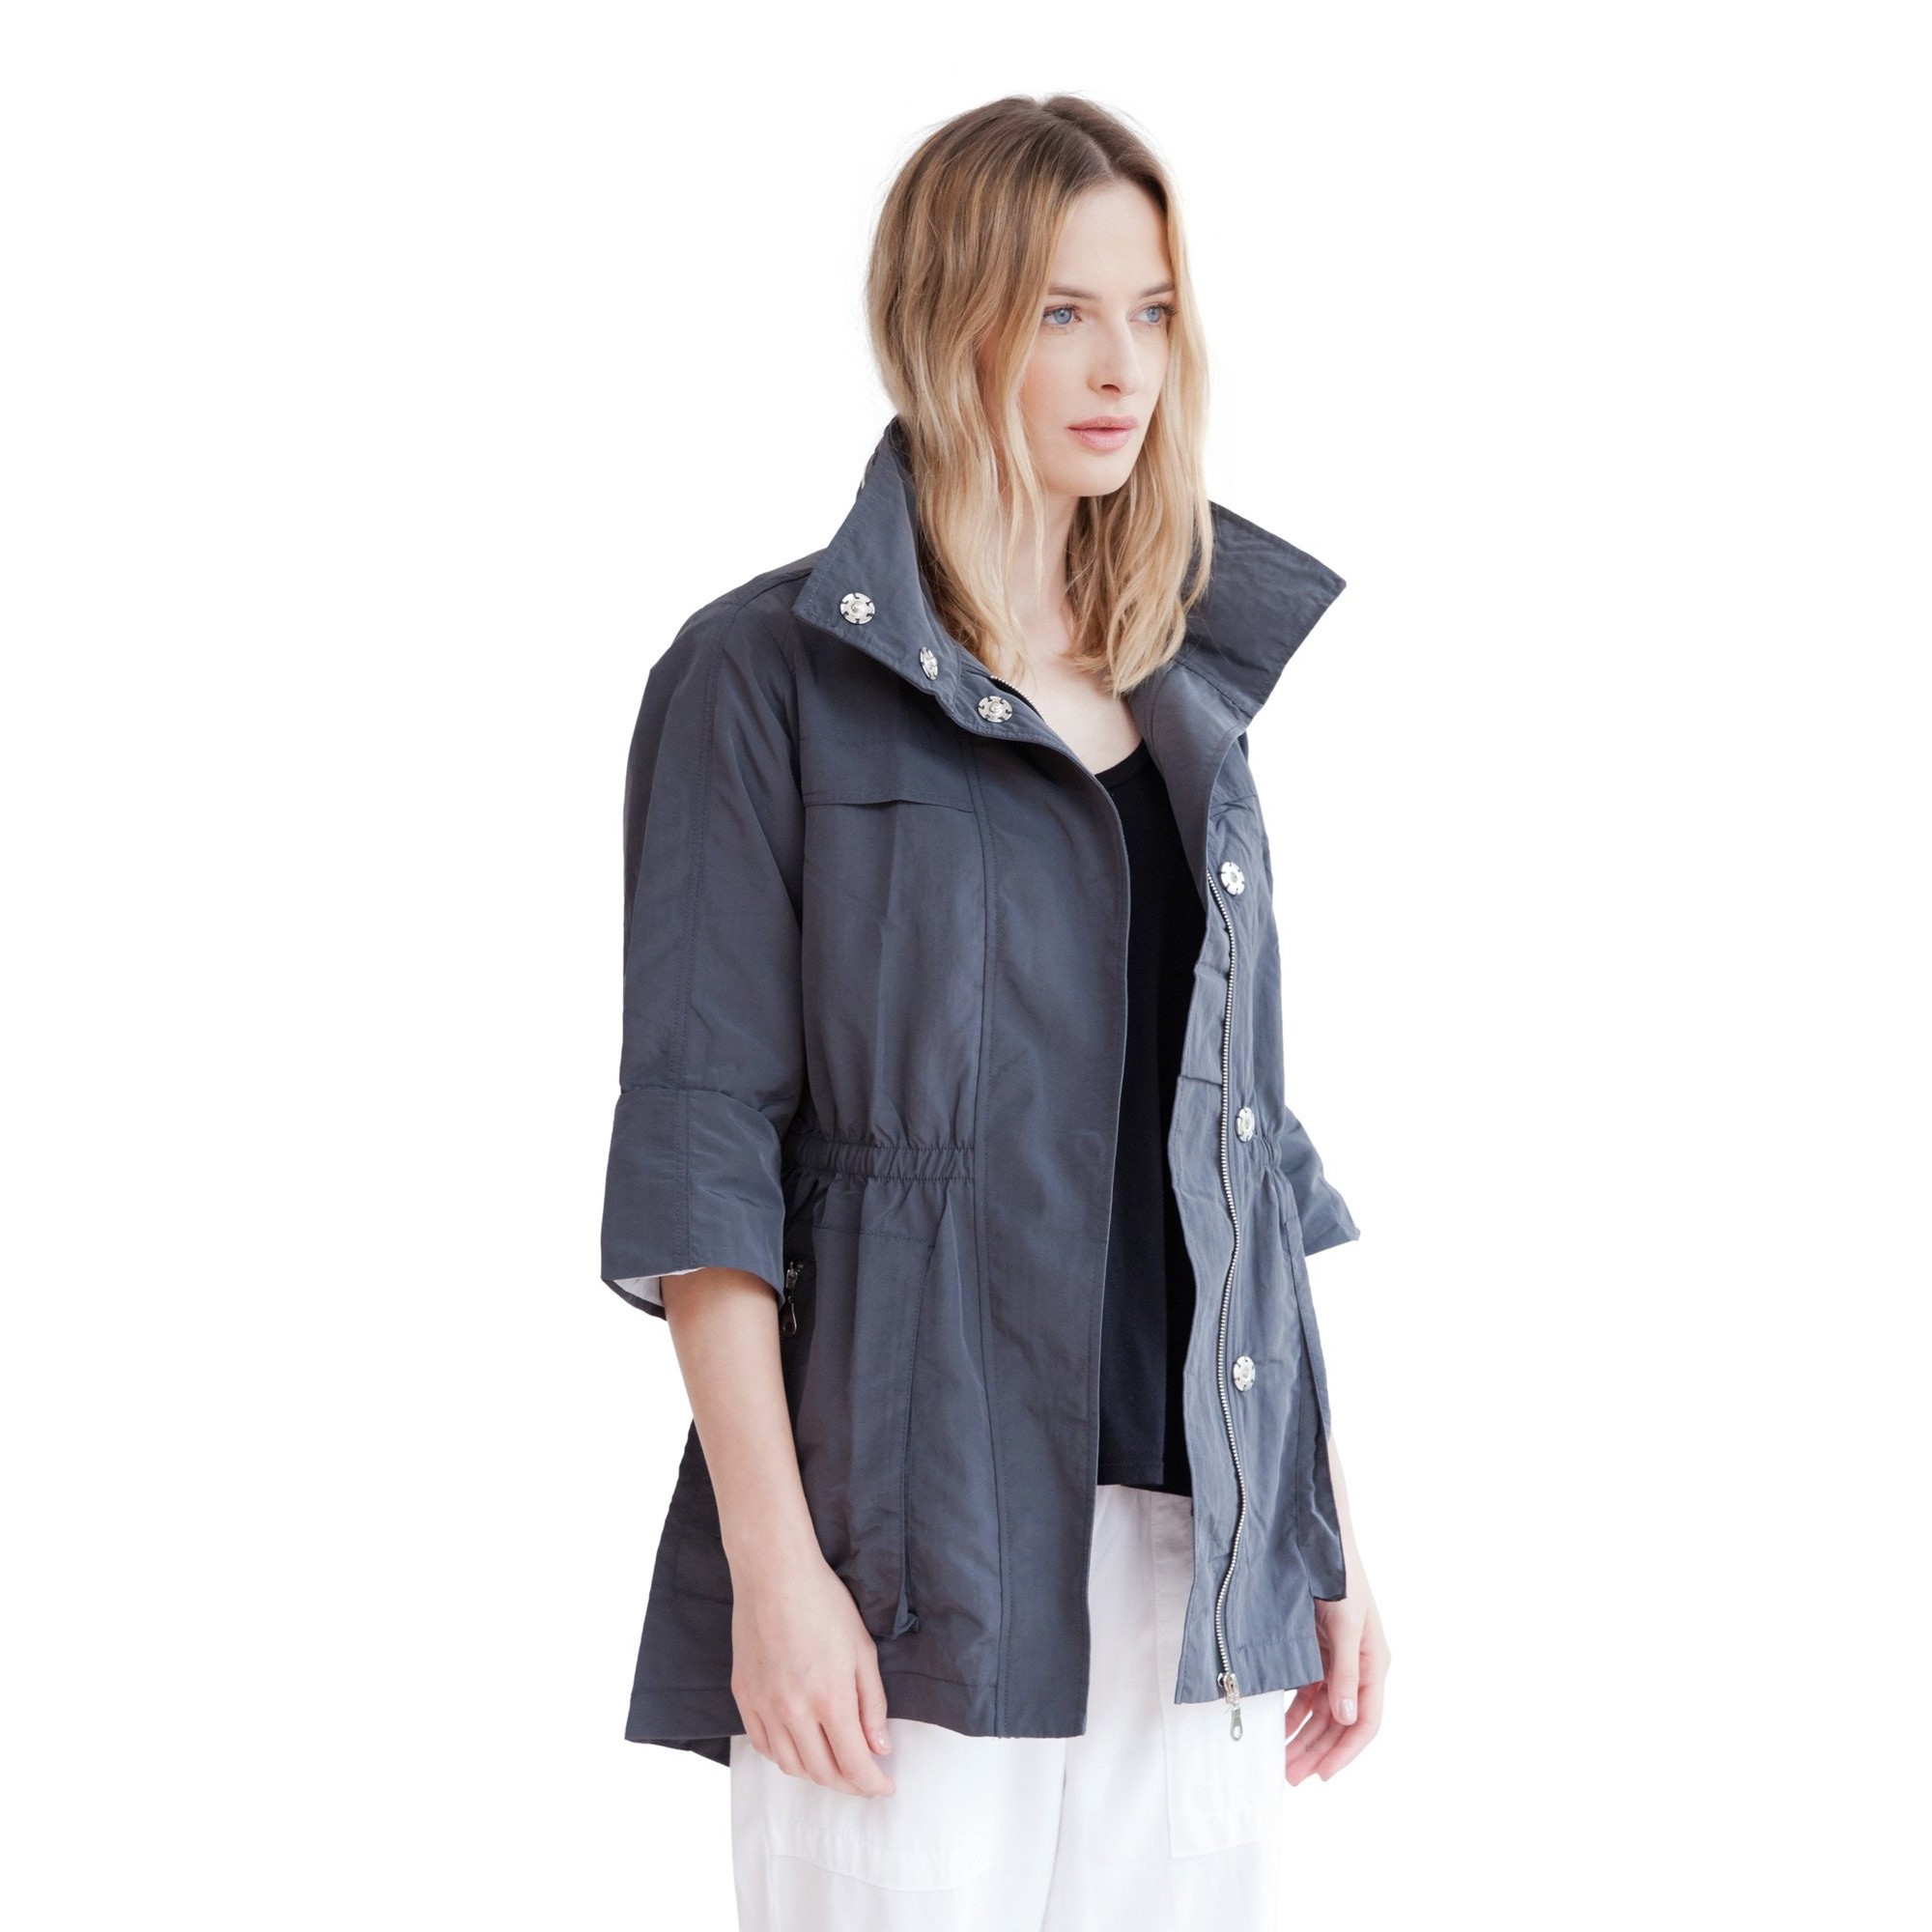 anorak The anorak jacket in crinkle nylon Tops Jackets-coats at 